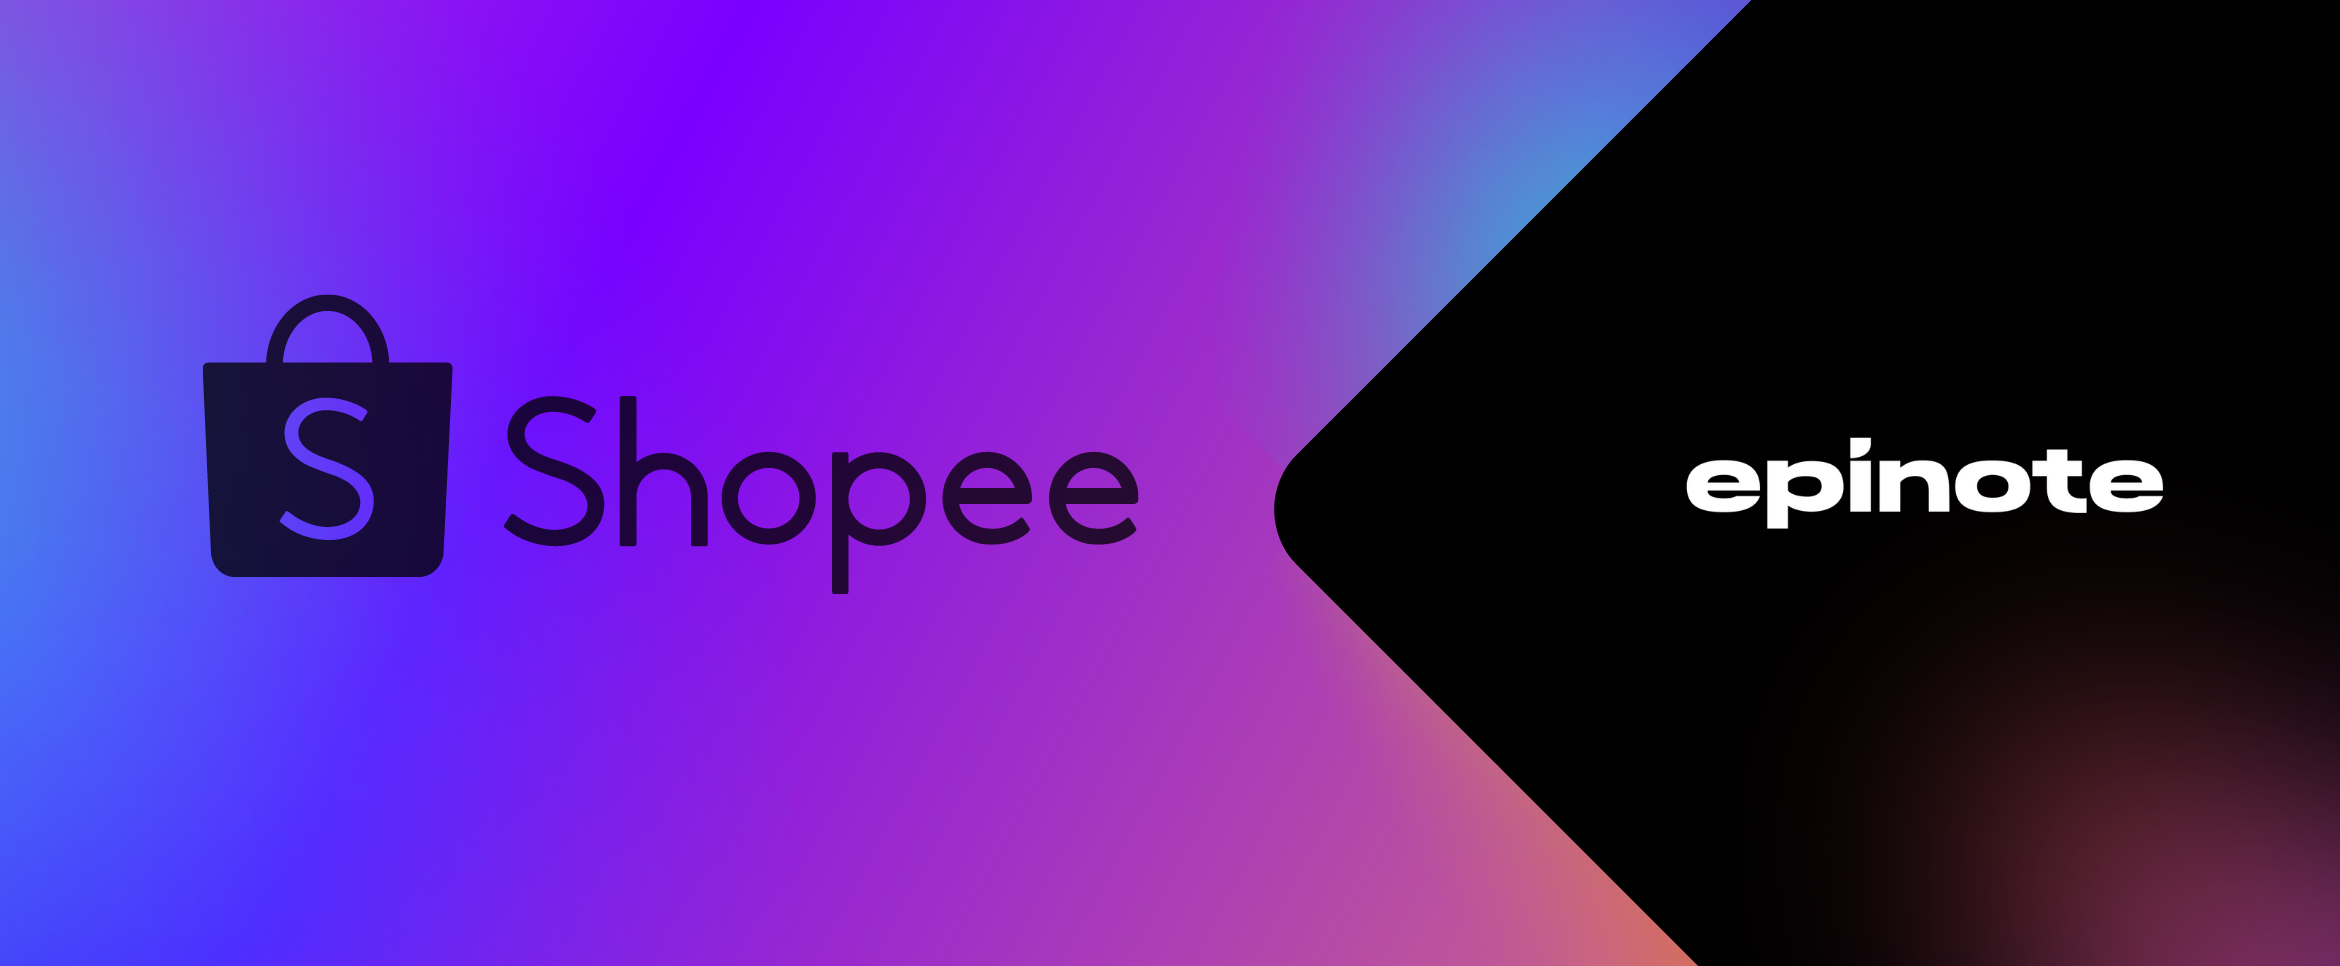 A banner showcasing two logotypes - Shopee and epinote. The Shopee logotype is located on the left, it's black and put on a gradient background with pink, purple and blue colours. The epinote logotype is white and put on a black background on the right. The two parts of the banner are connected with a triangular shape.